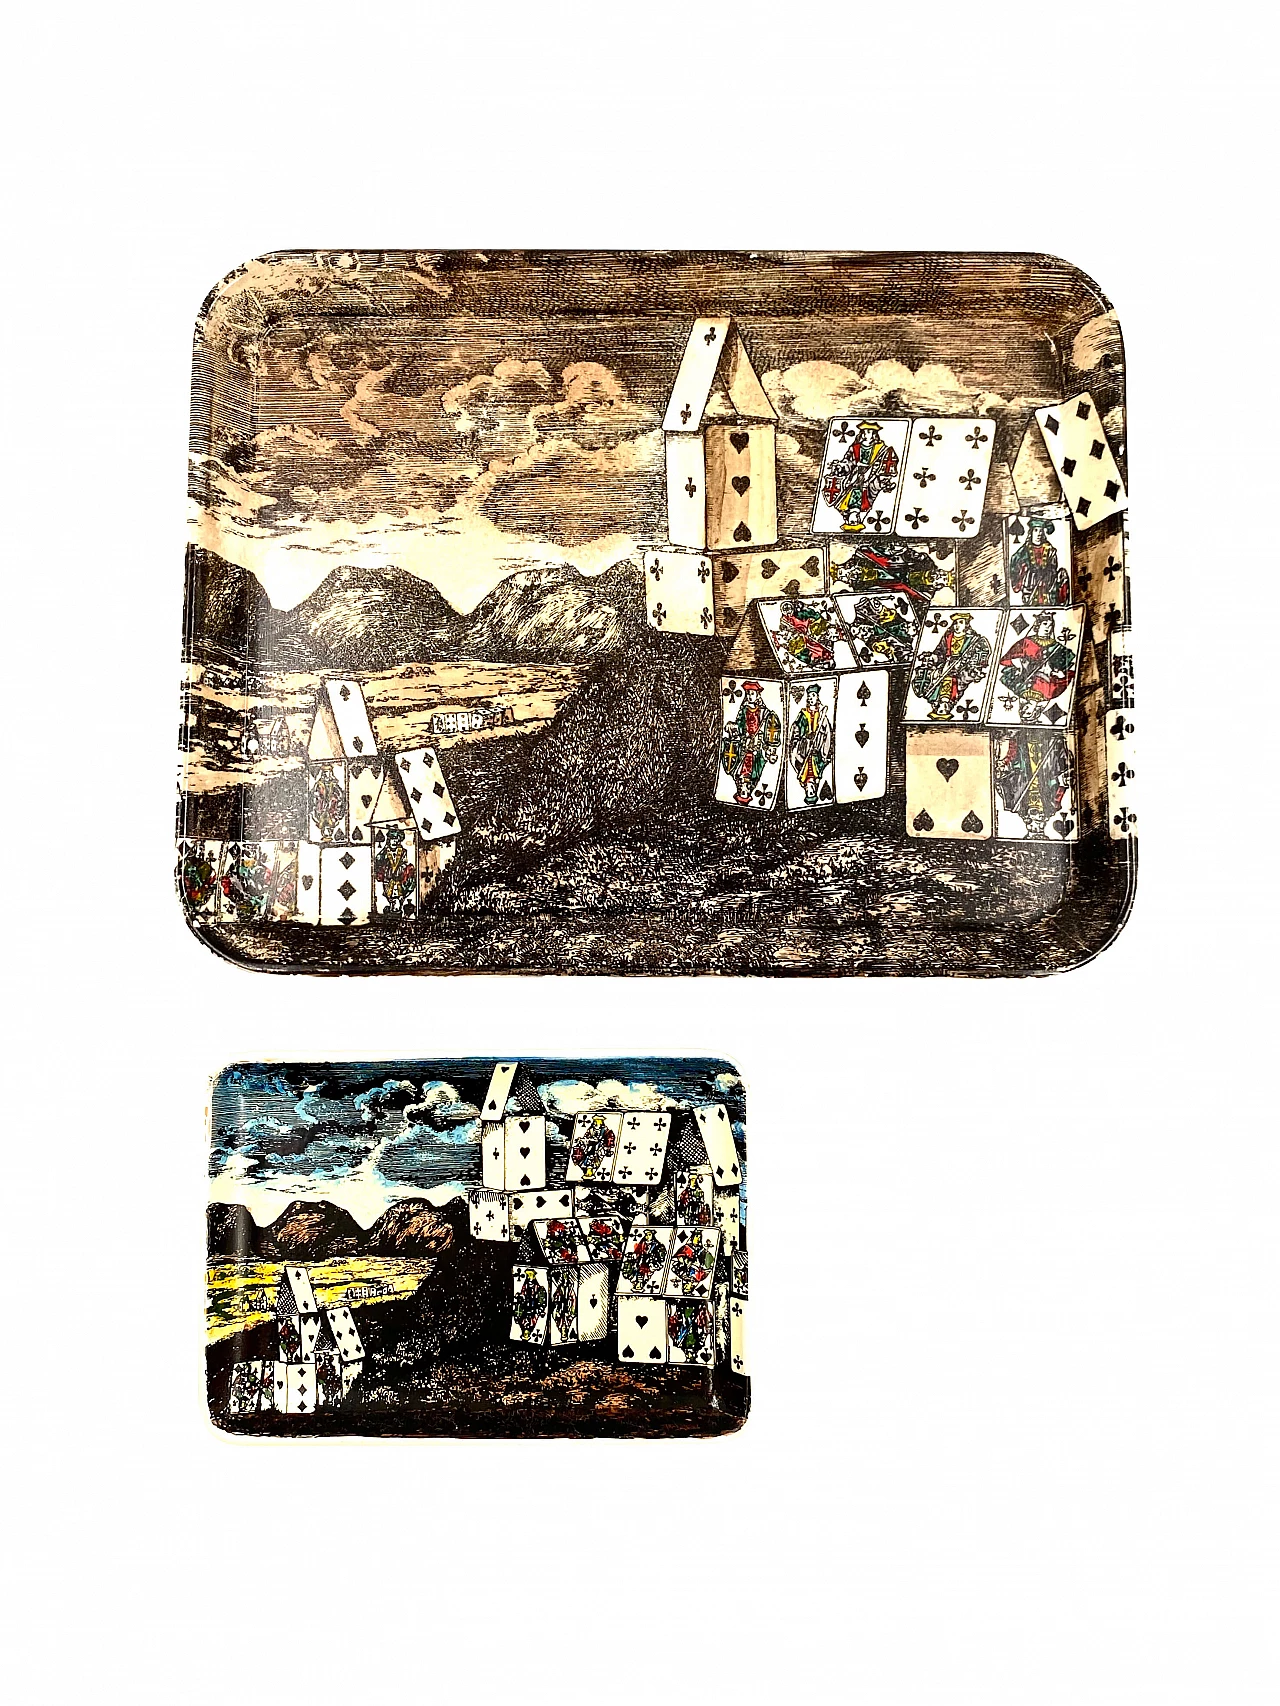 2 City of Cards trays by Piero Fornasetti, 1960s 1141123